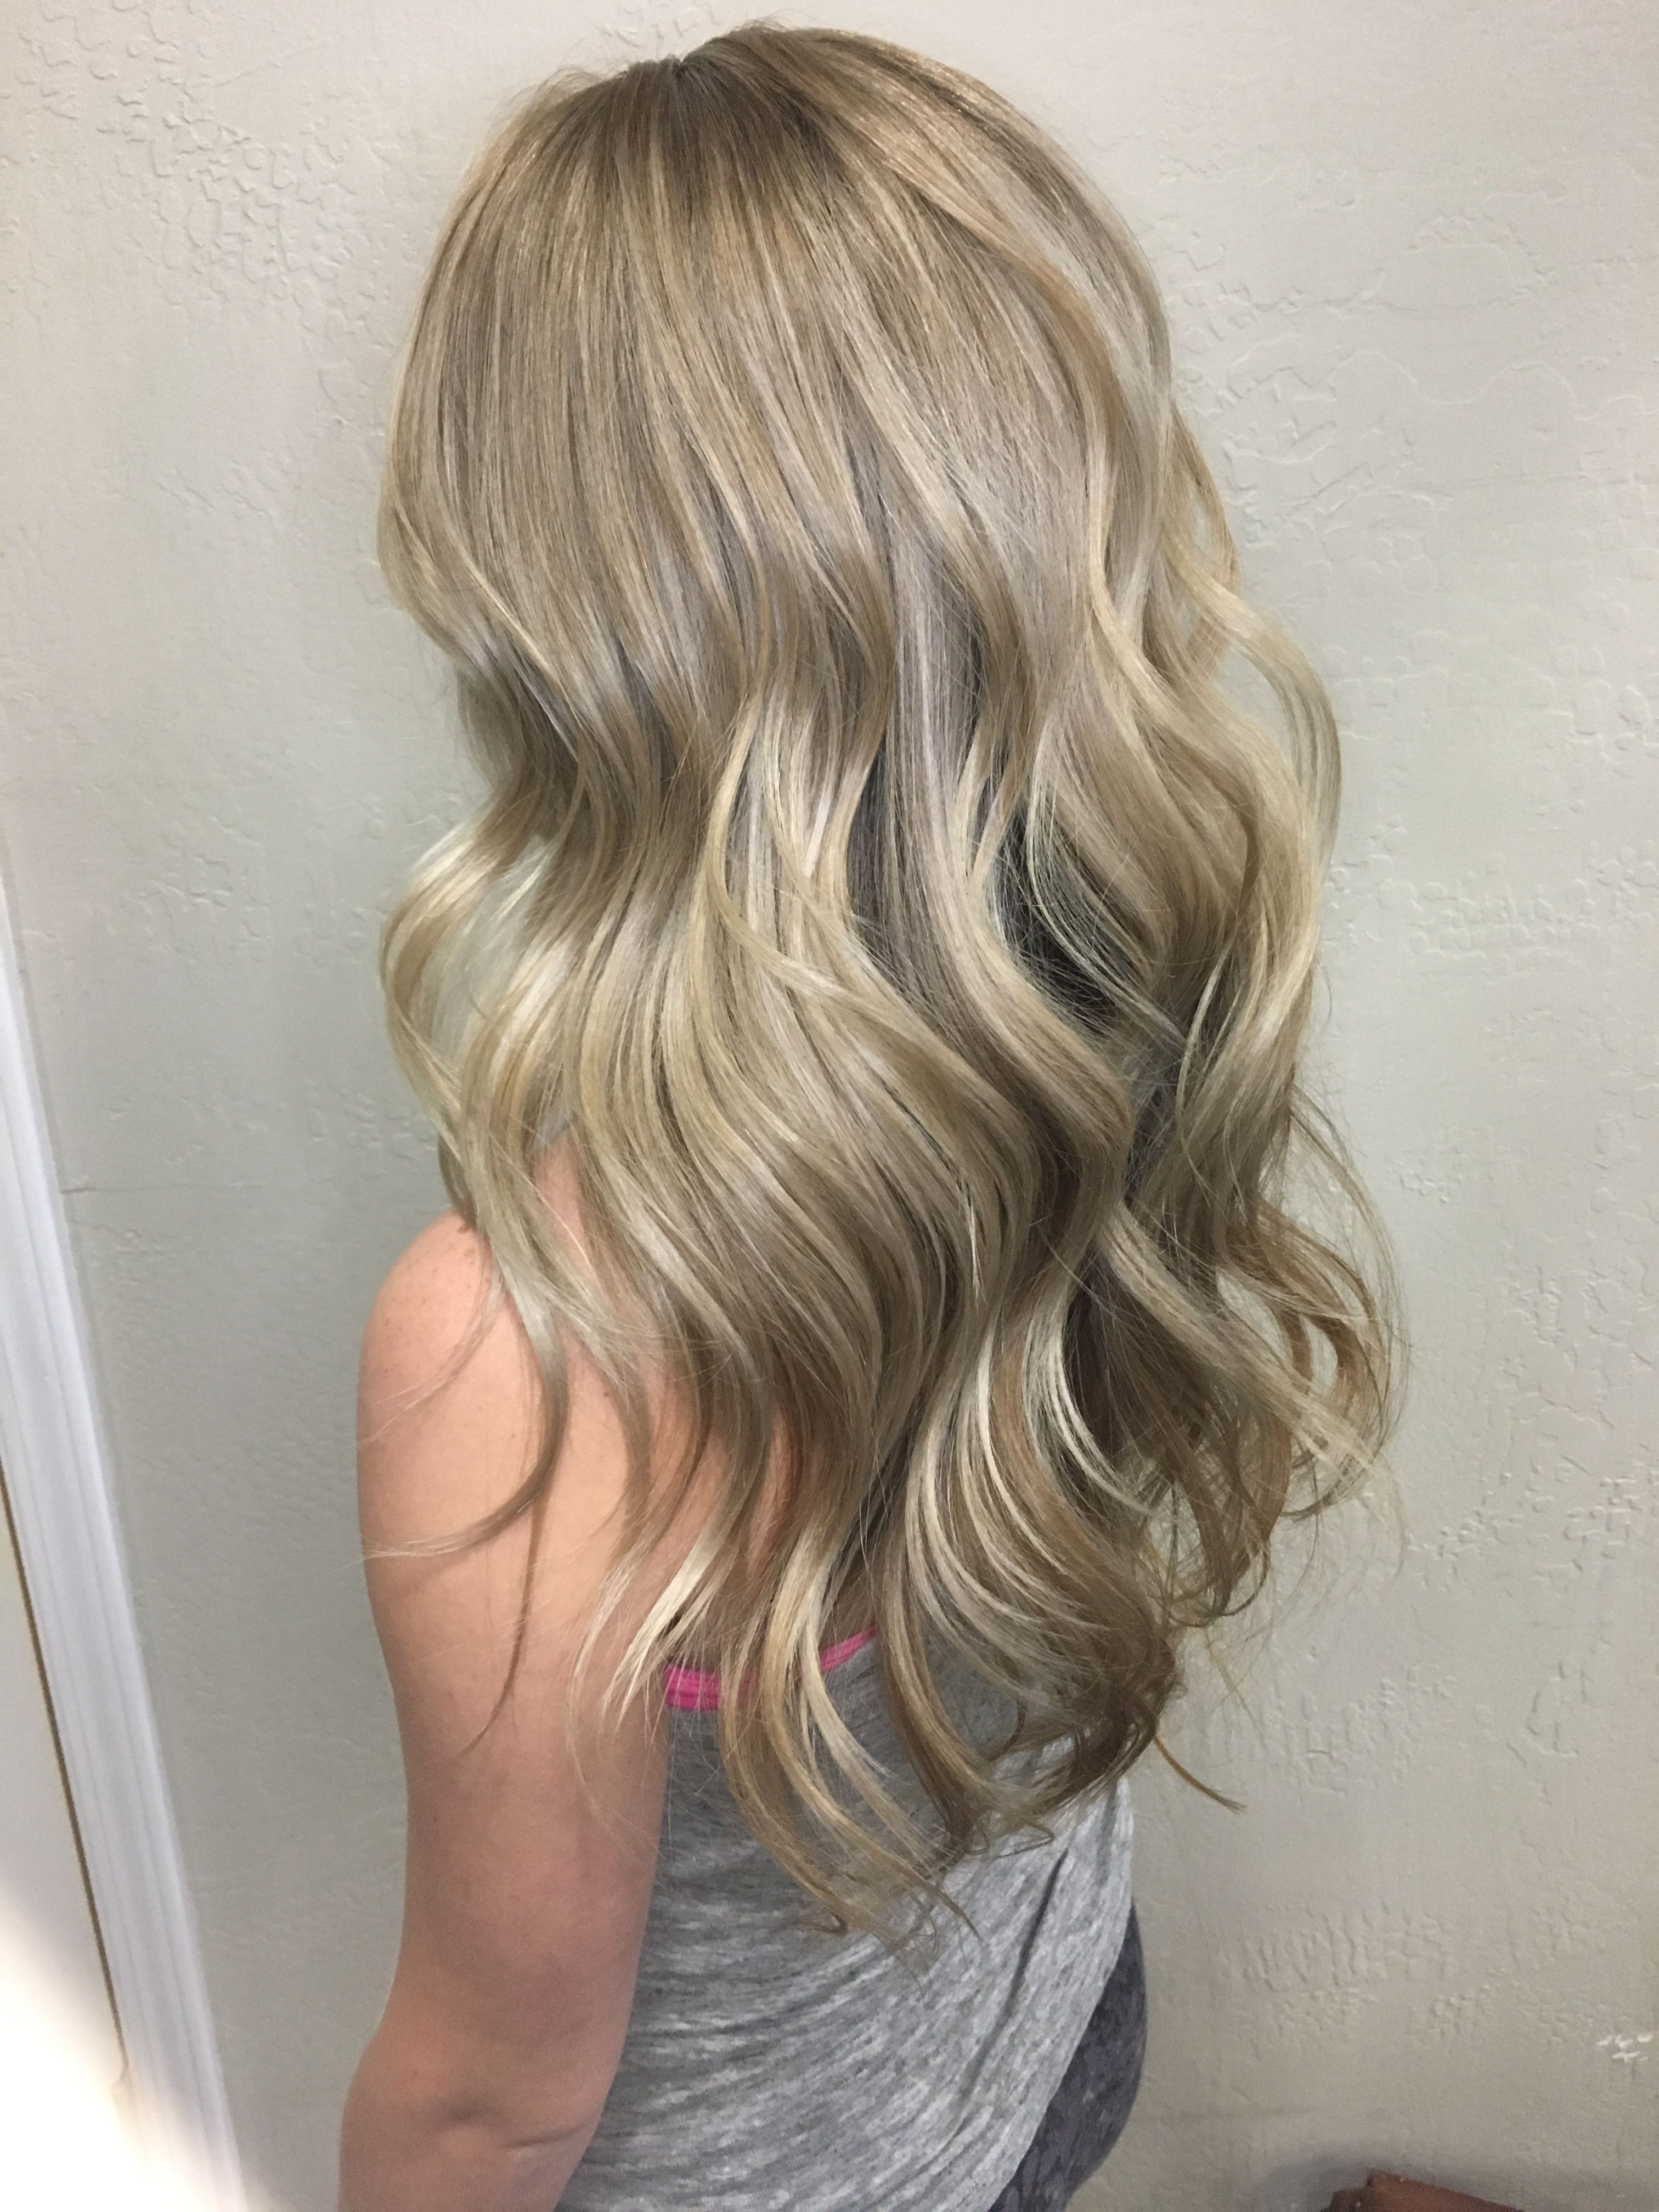 Balayage, Blonde Highlights, Light Blonde Hair, Hair Color, Ash Throughout Popular Feathered Ash Blonde Hairstyles (View 5 of 20)